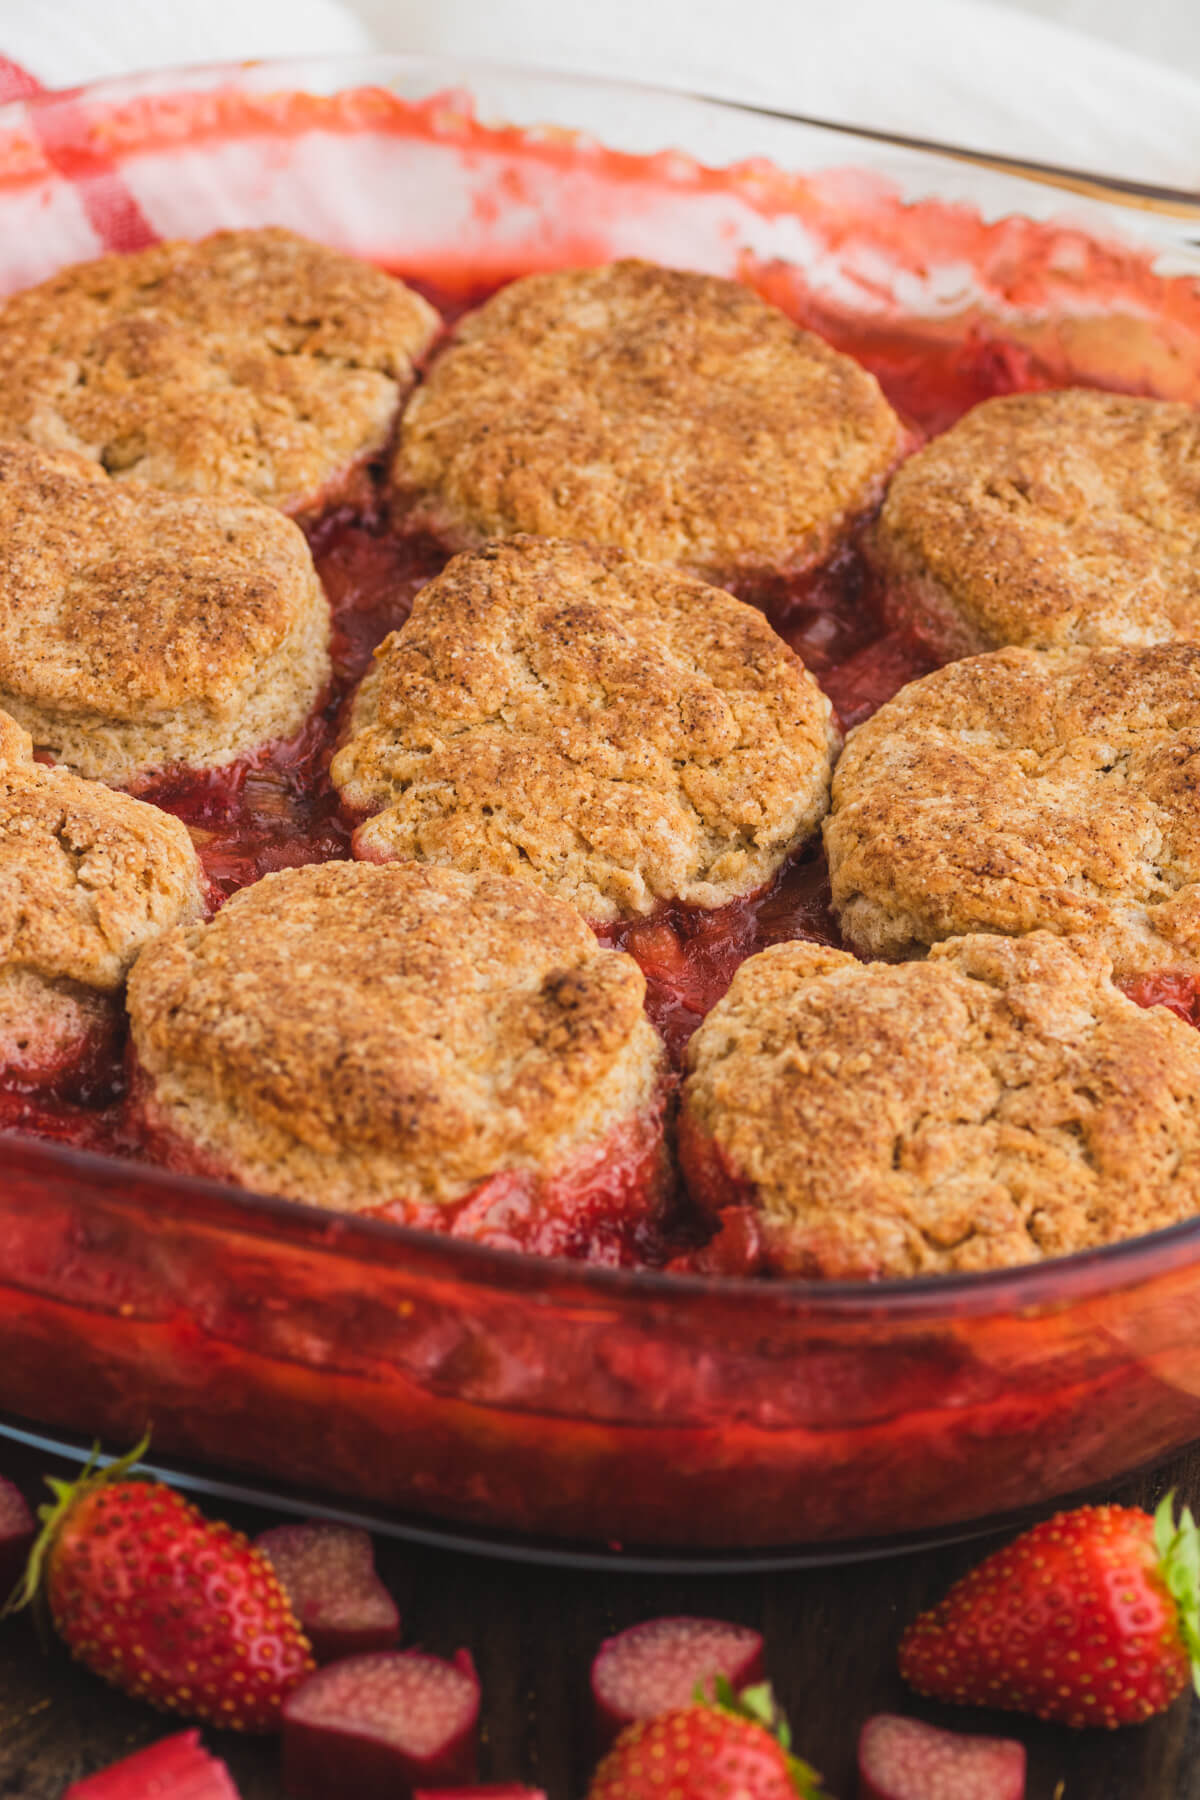 Golden baked biscuit cobbles on top of strawberry rhubarb cobbler.